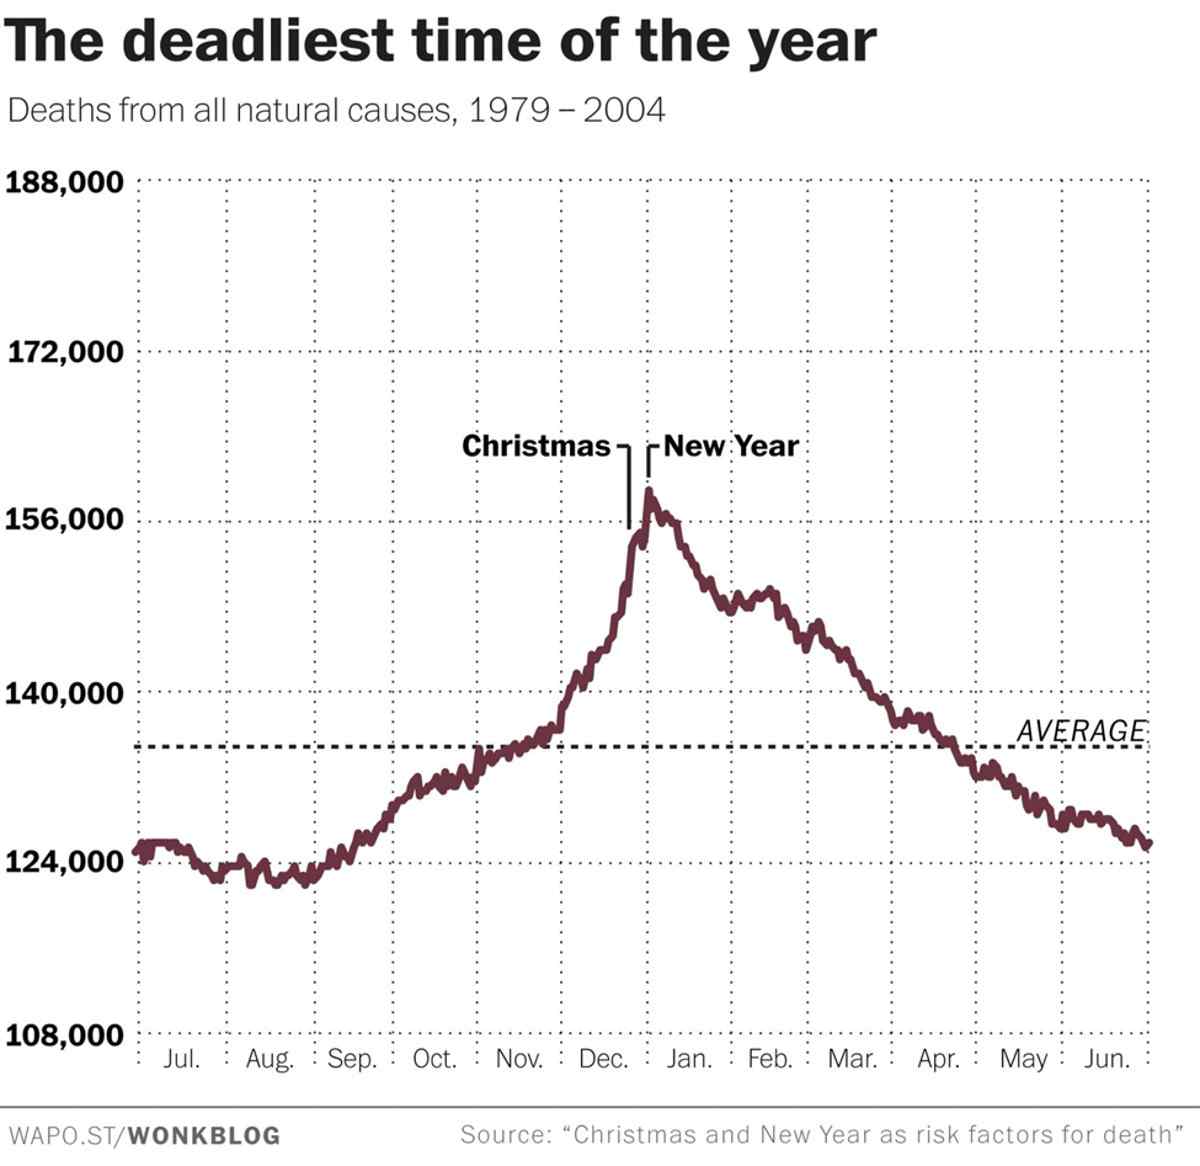 Chart showing the deadliest time of the year.